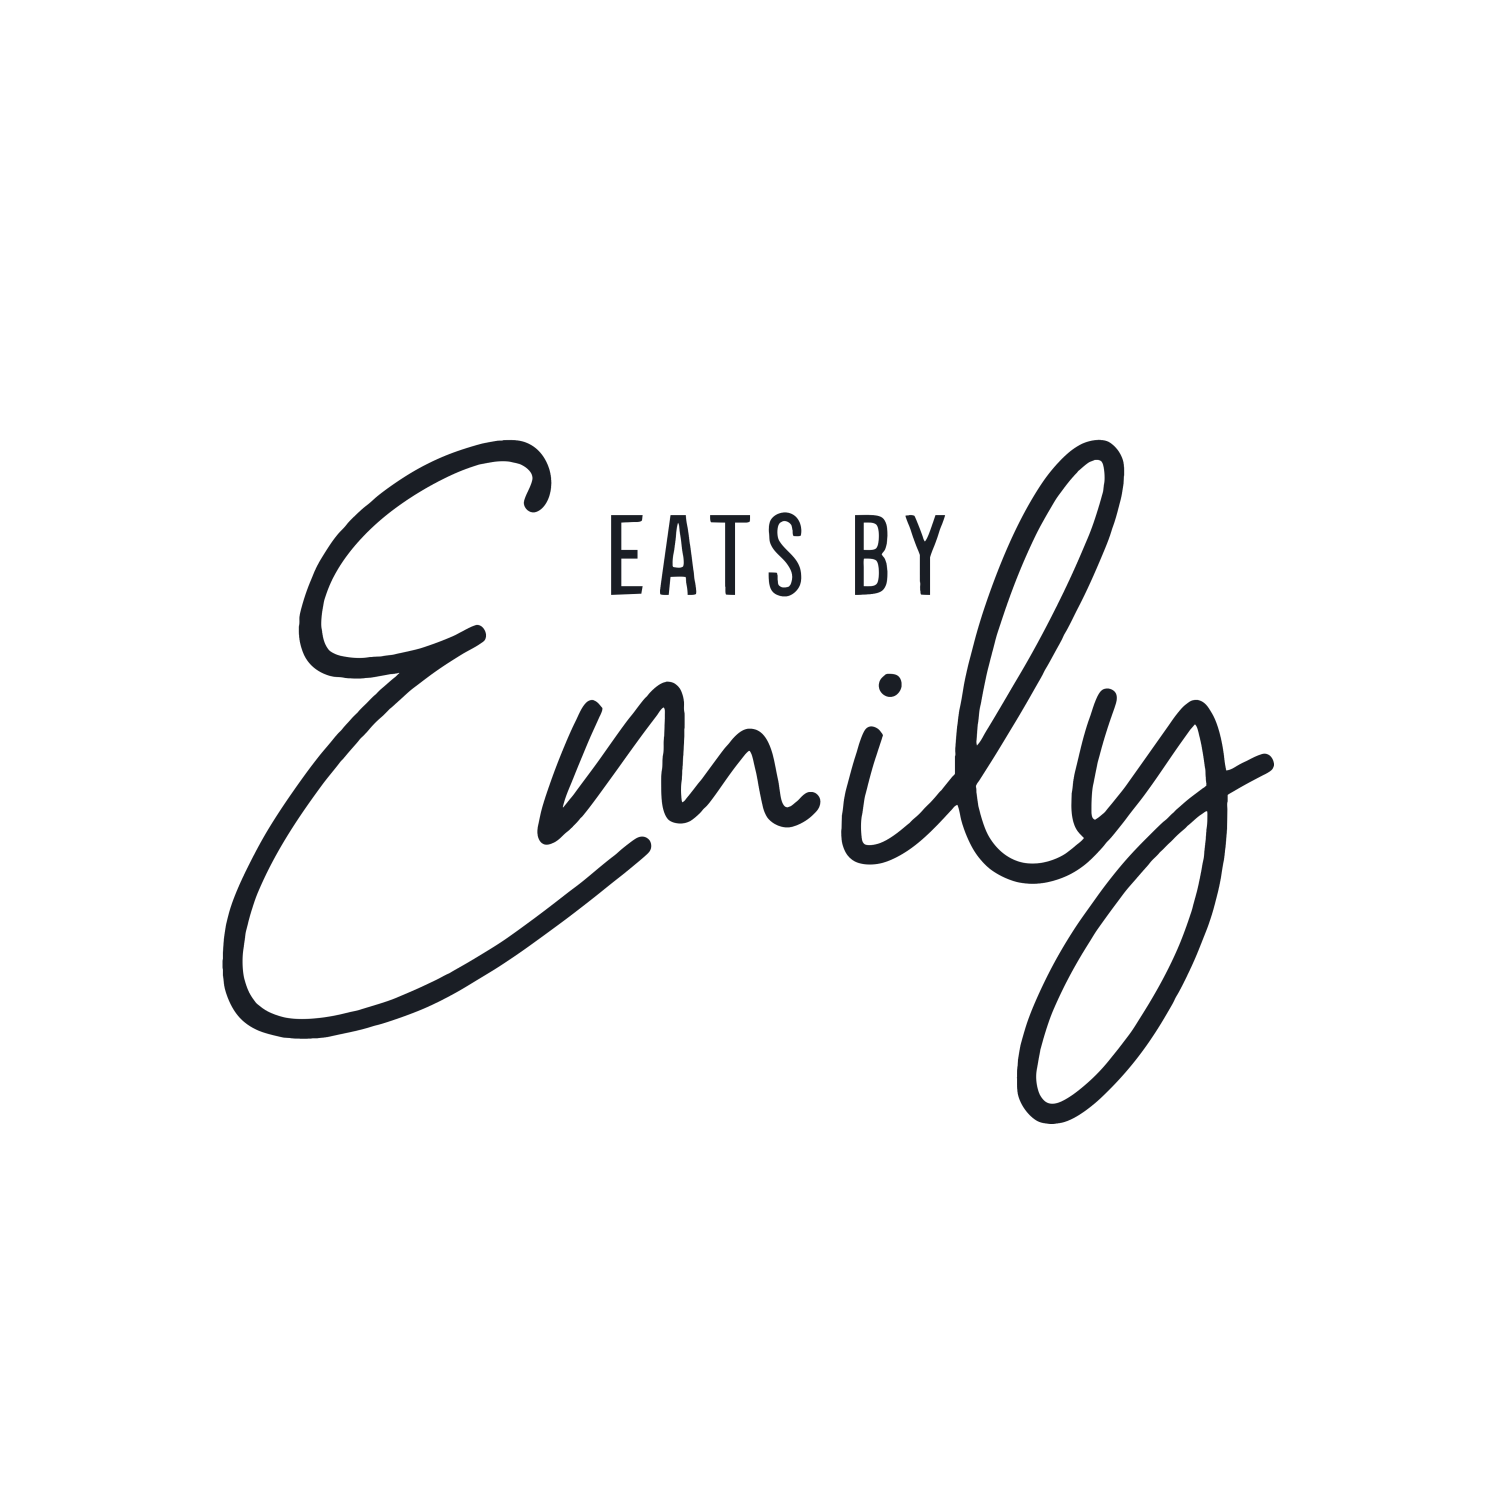 Eats by Emily